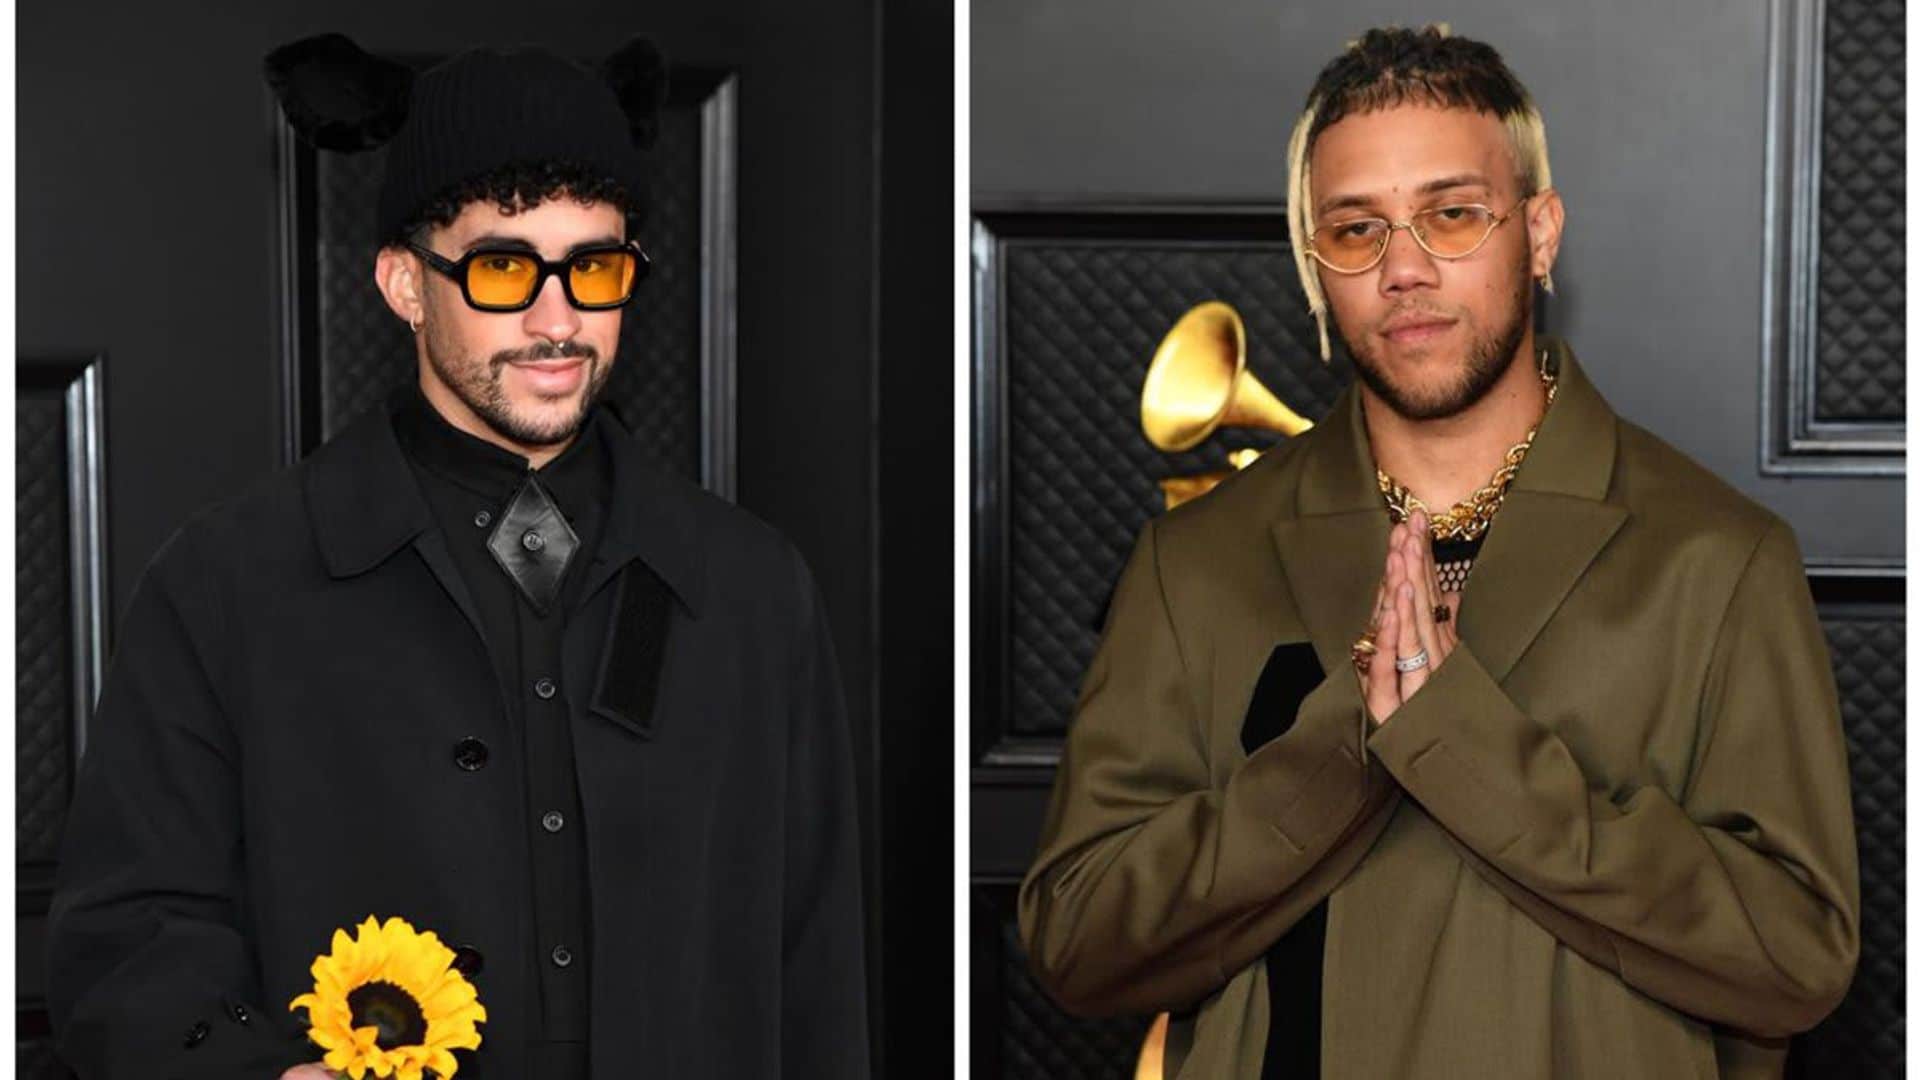 Puerto Rican stars Bad Bunny and Jhay Cortez take the audience to the club with GRAMMY performance